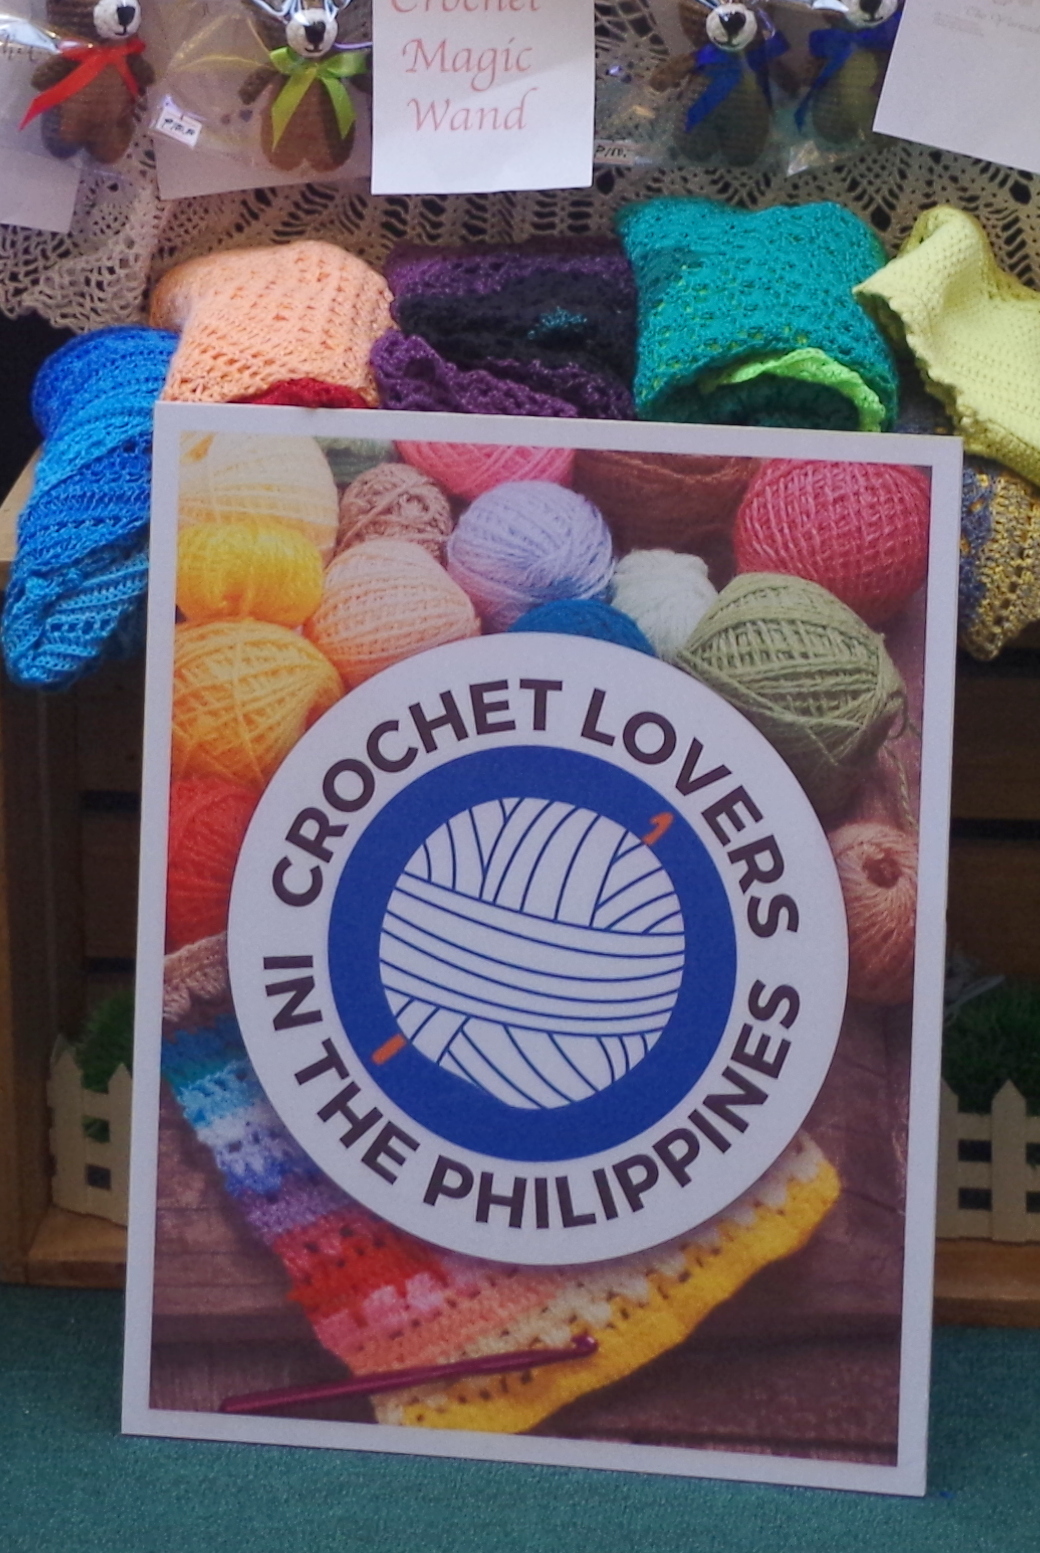 Crochet Lovers in the Philippines